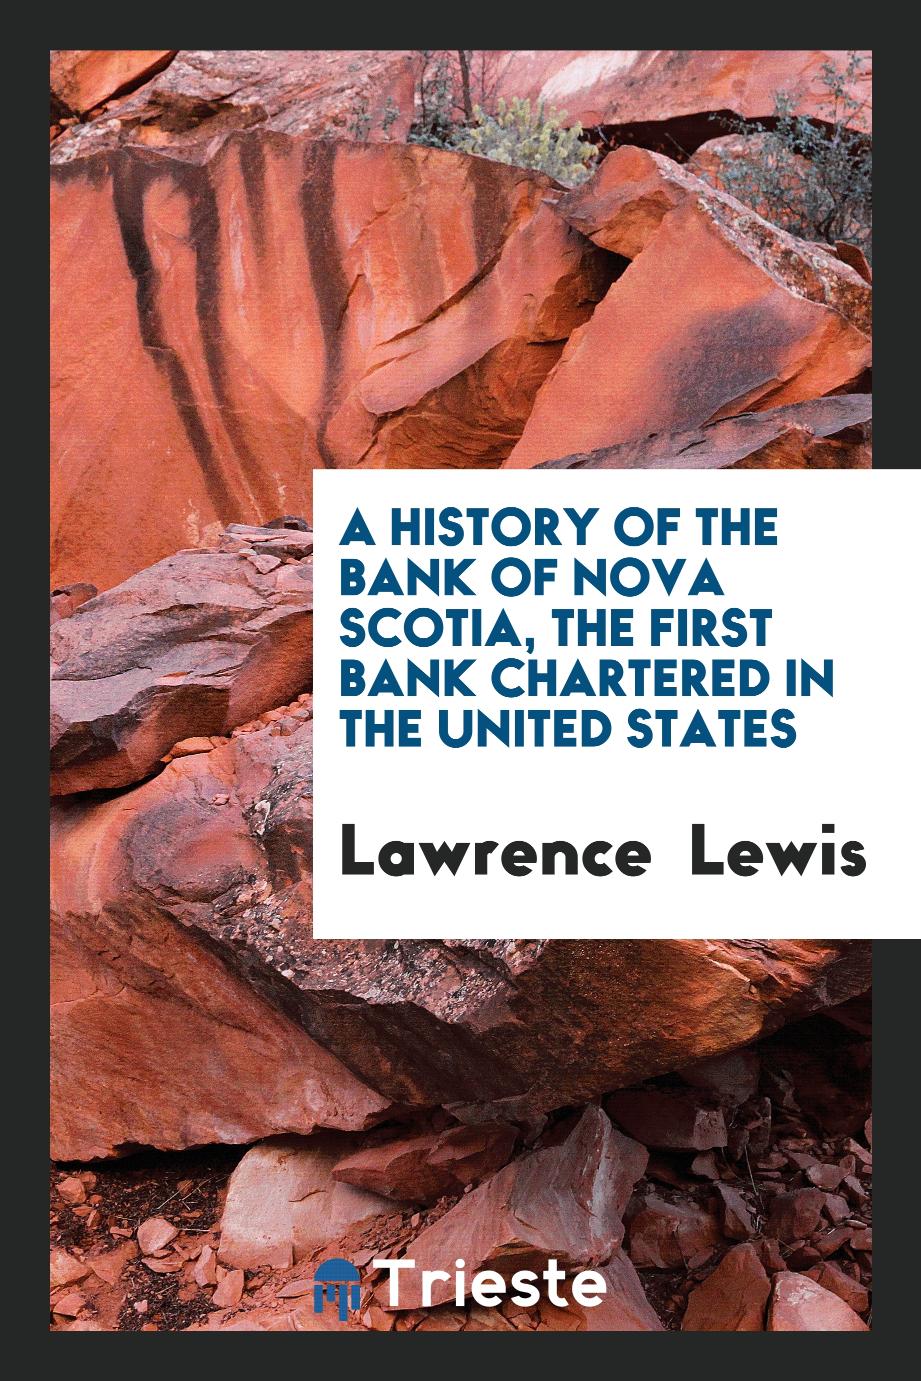 A History of the Bank of Nova Scotia, the first bank chartered in the United States